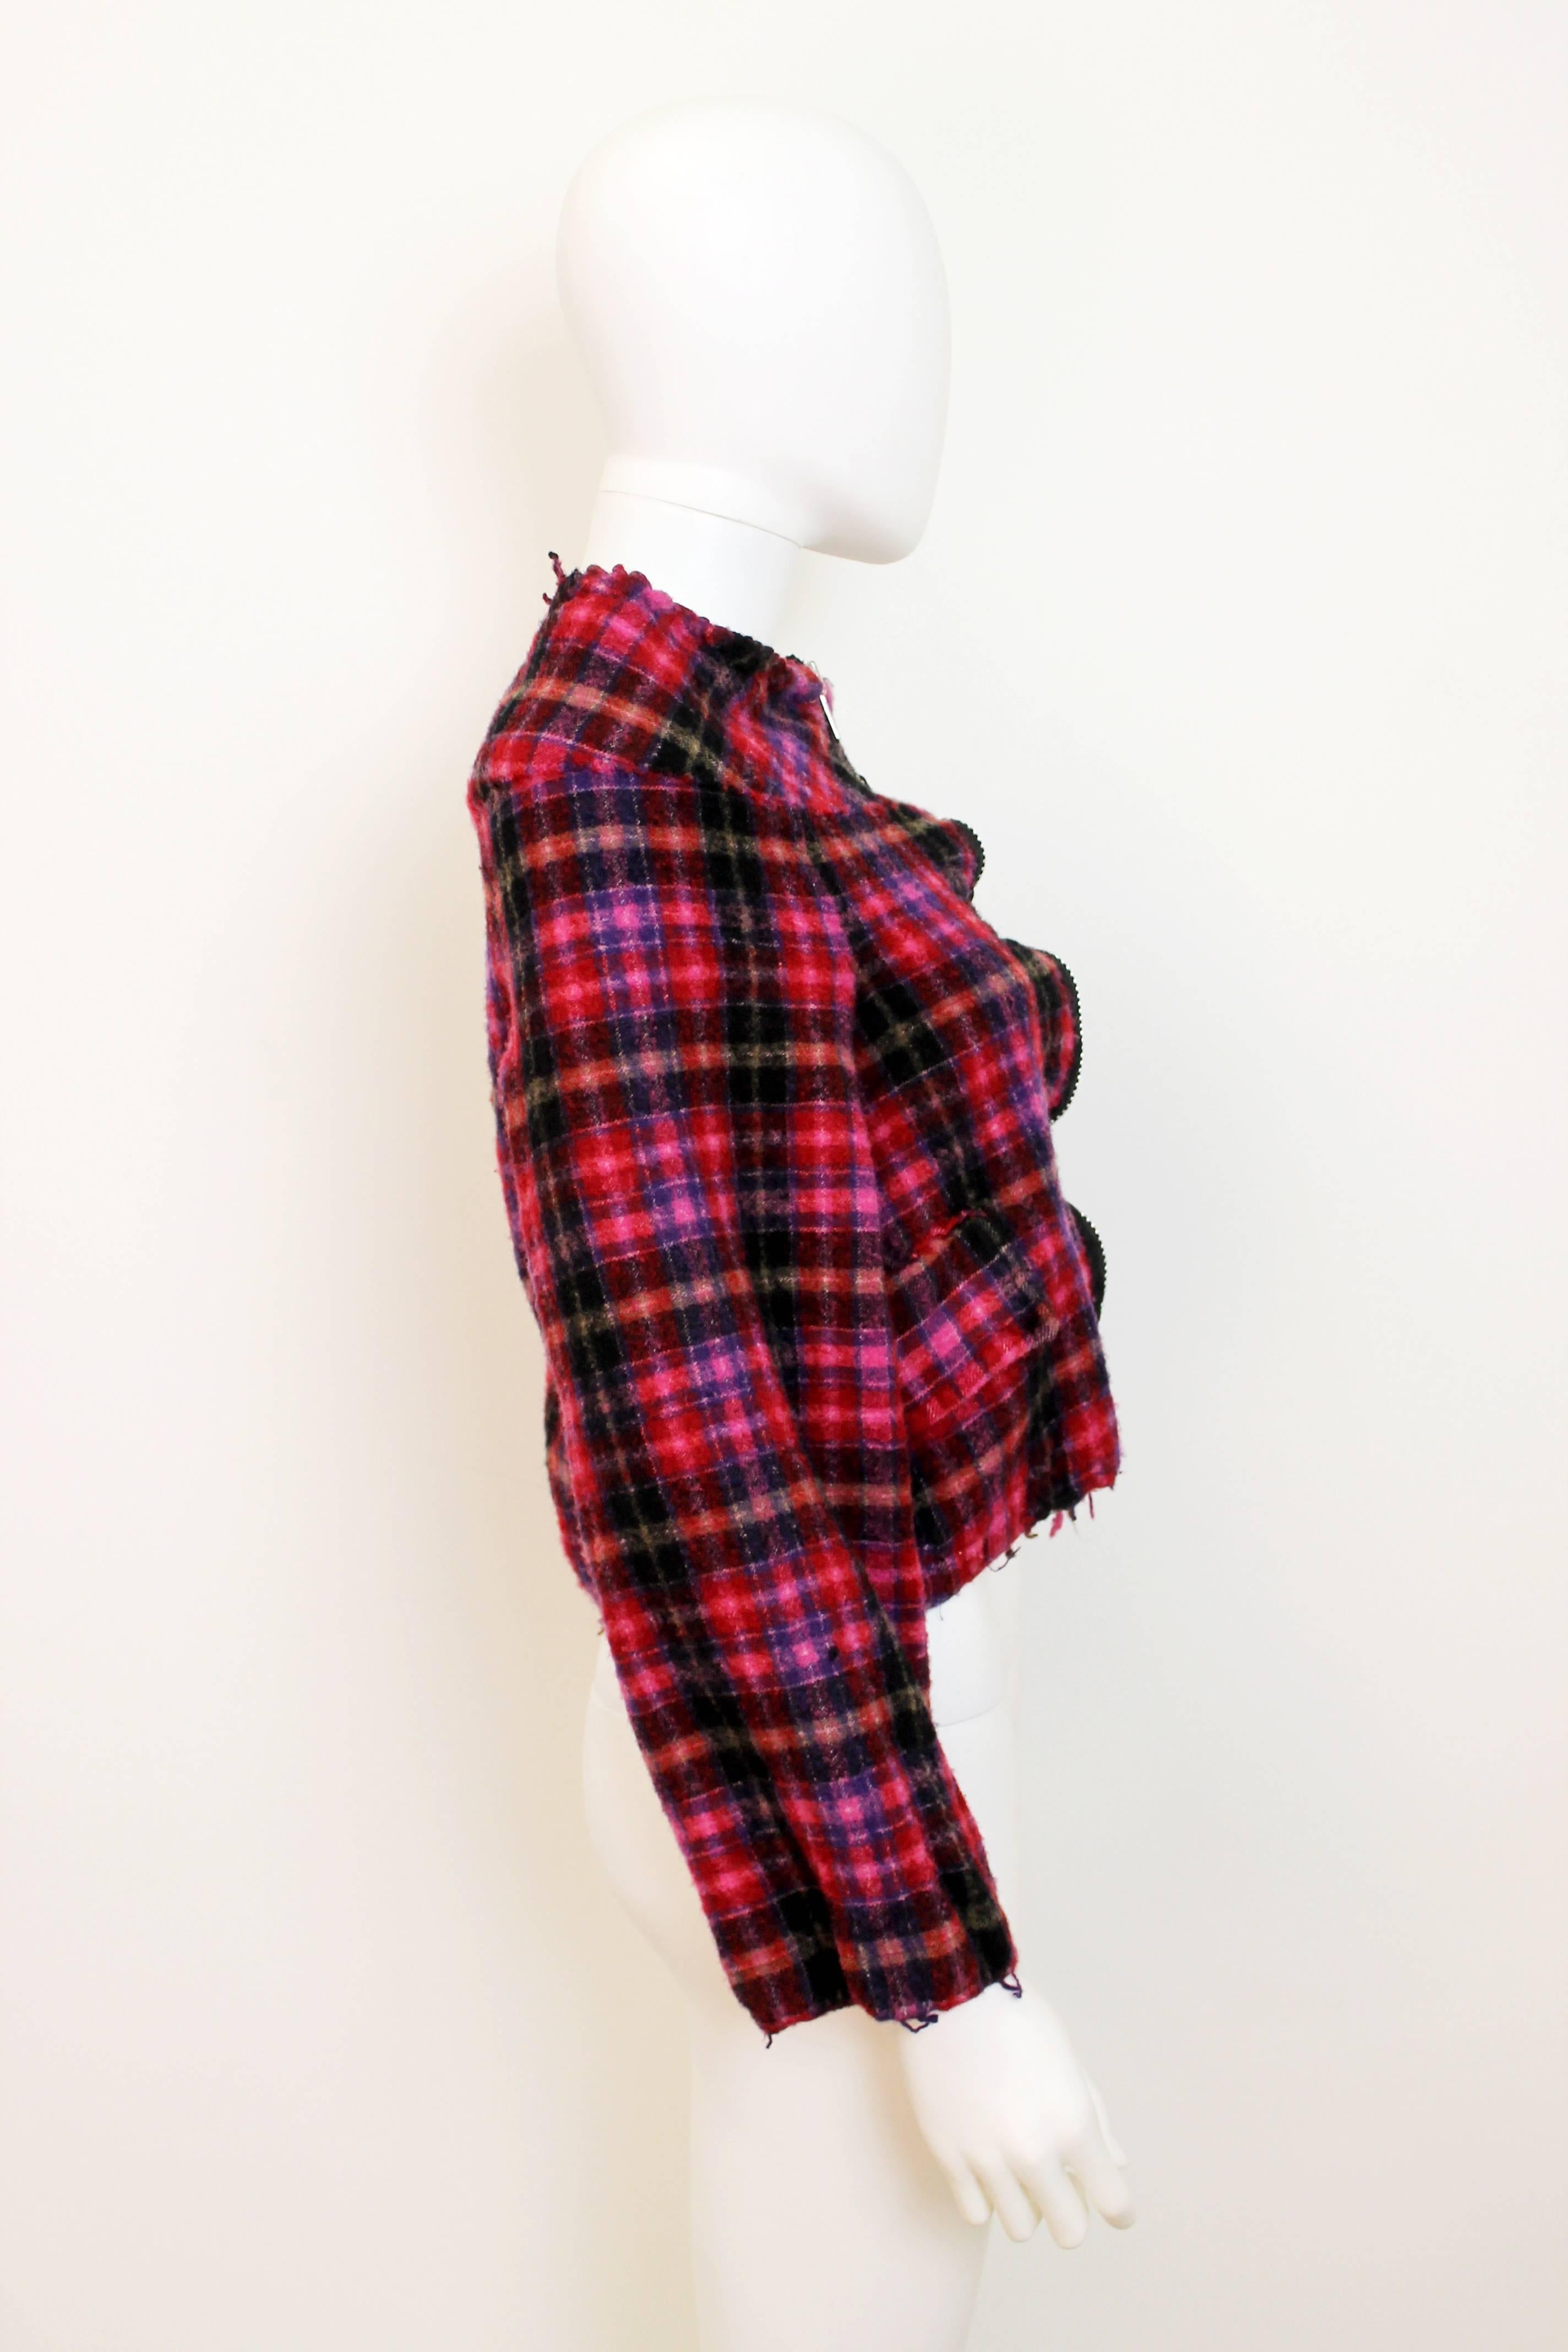 Adorable Comme des Garcons pink checked cropped jacked from 2004. Features a large silver zip closure up the center front and a frayed edge hem. 